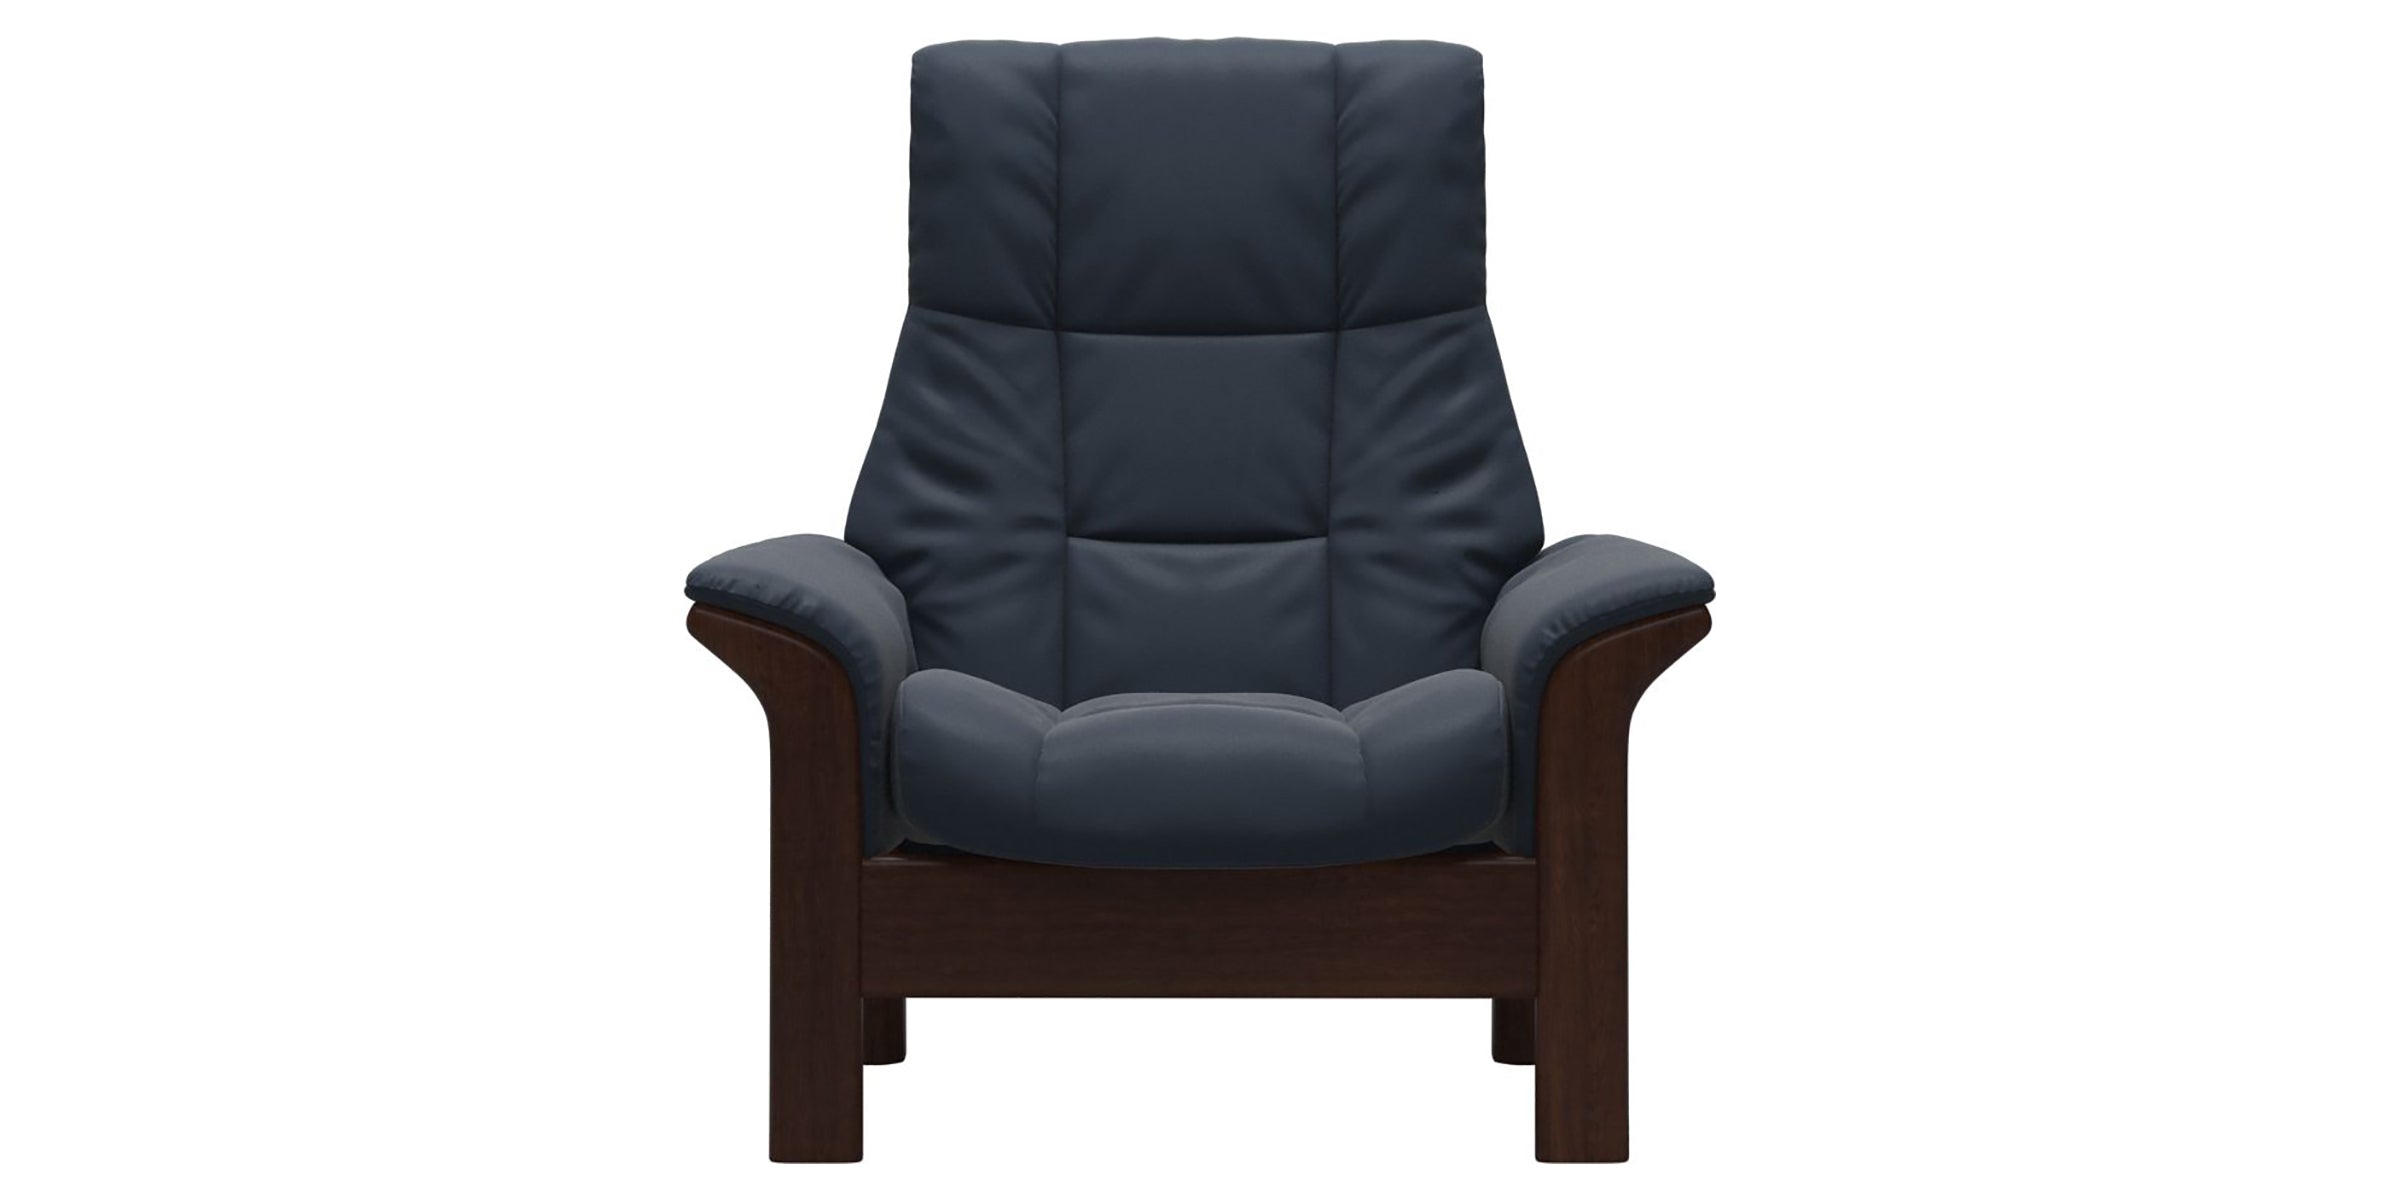 Paloma Leather Oxford Blue and Brown Base | Stressless Windsor High Back Chair | Valley Ridge Furniture